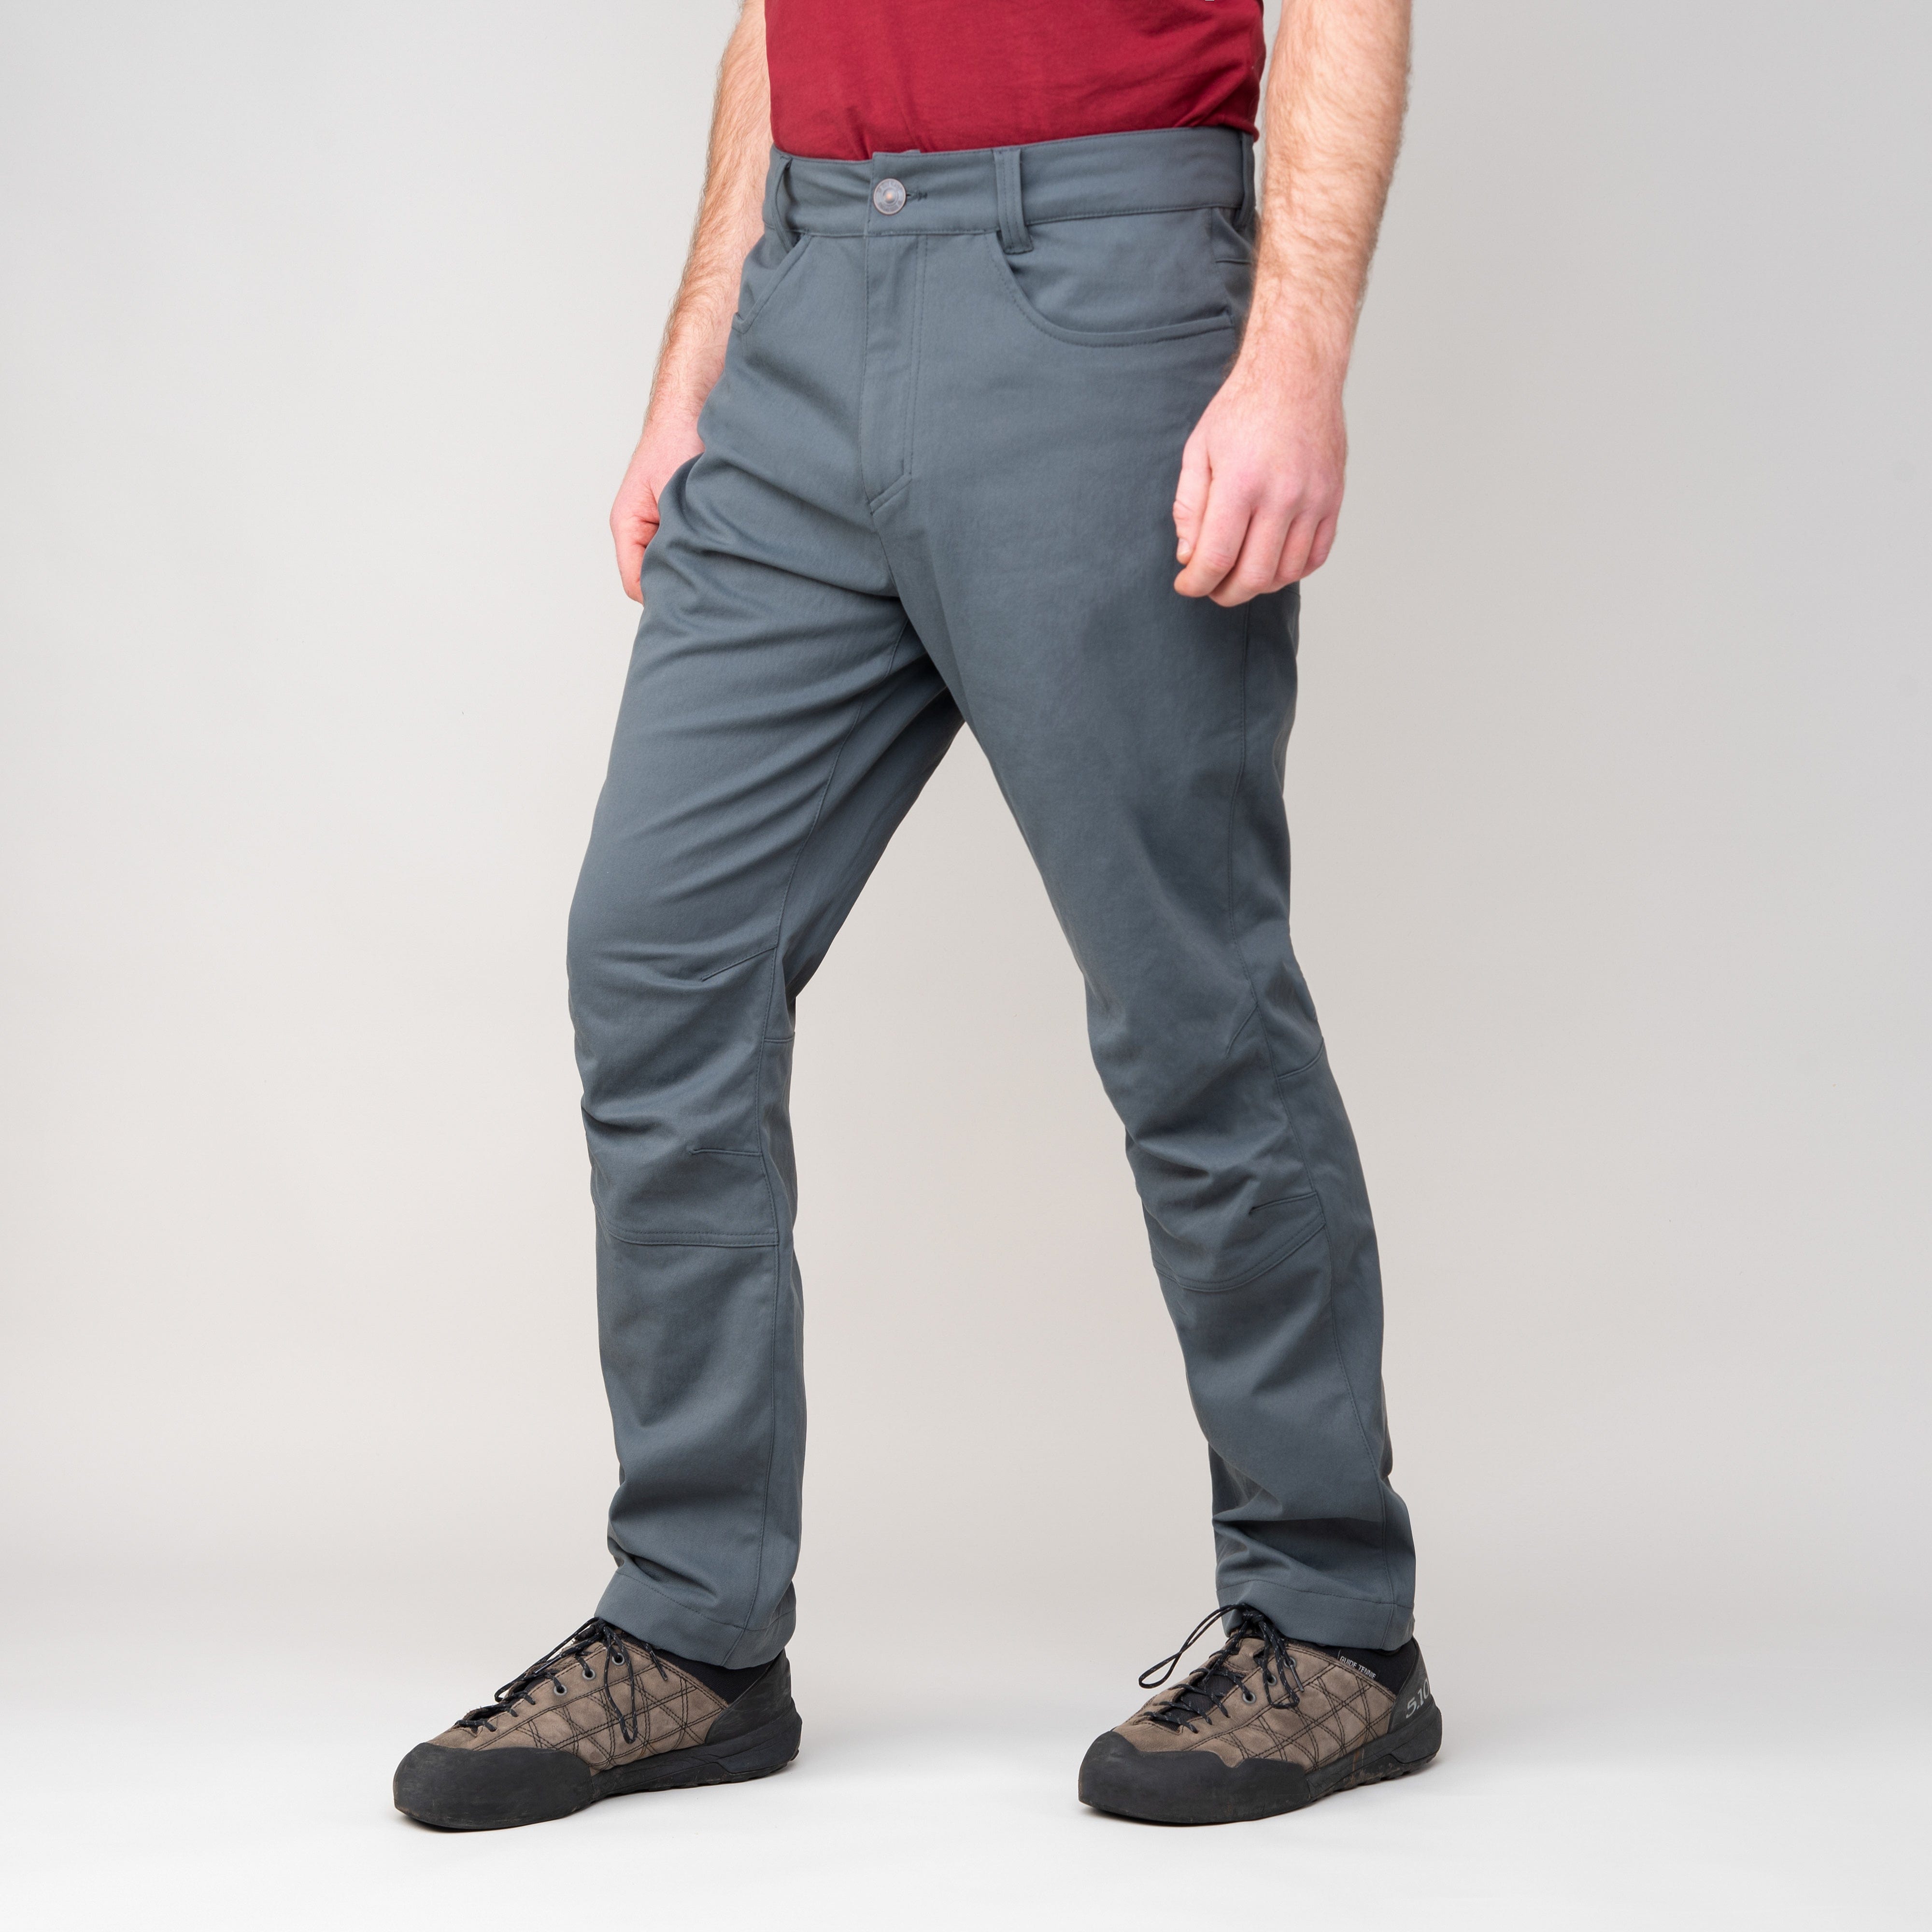 Trousers that lie about the real size of a mans waist  Daily Mail Online